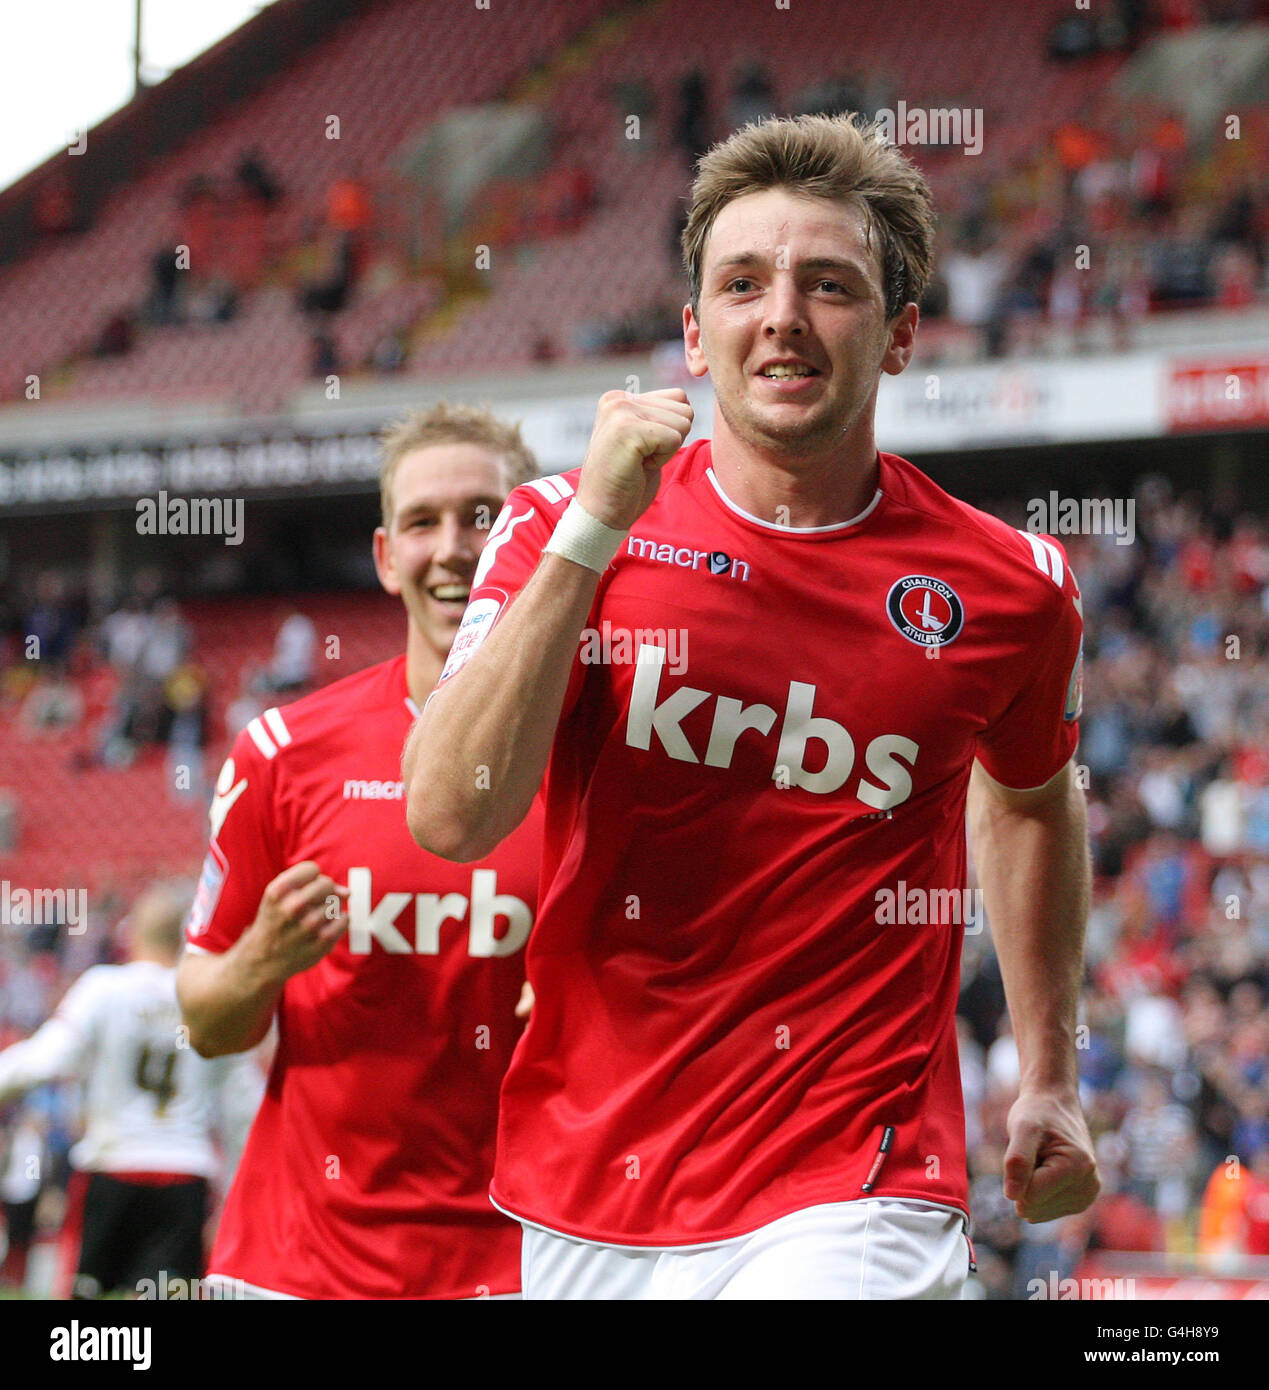 Charlton Athletic's Dale Stephens (right) celebrates scoring during the npower Football League One match at The Valley, London. Stock Photo